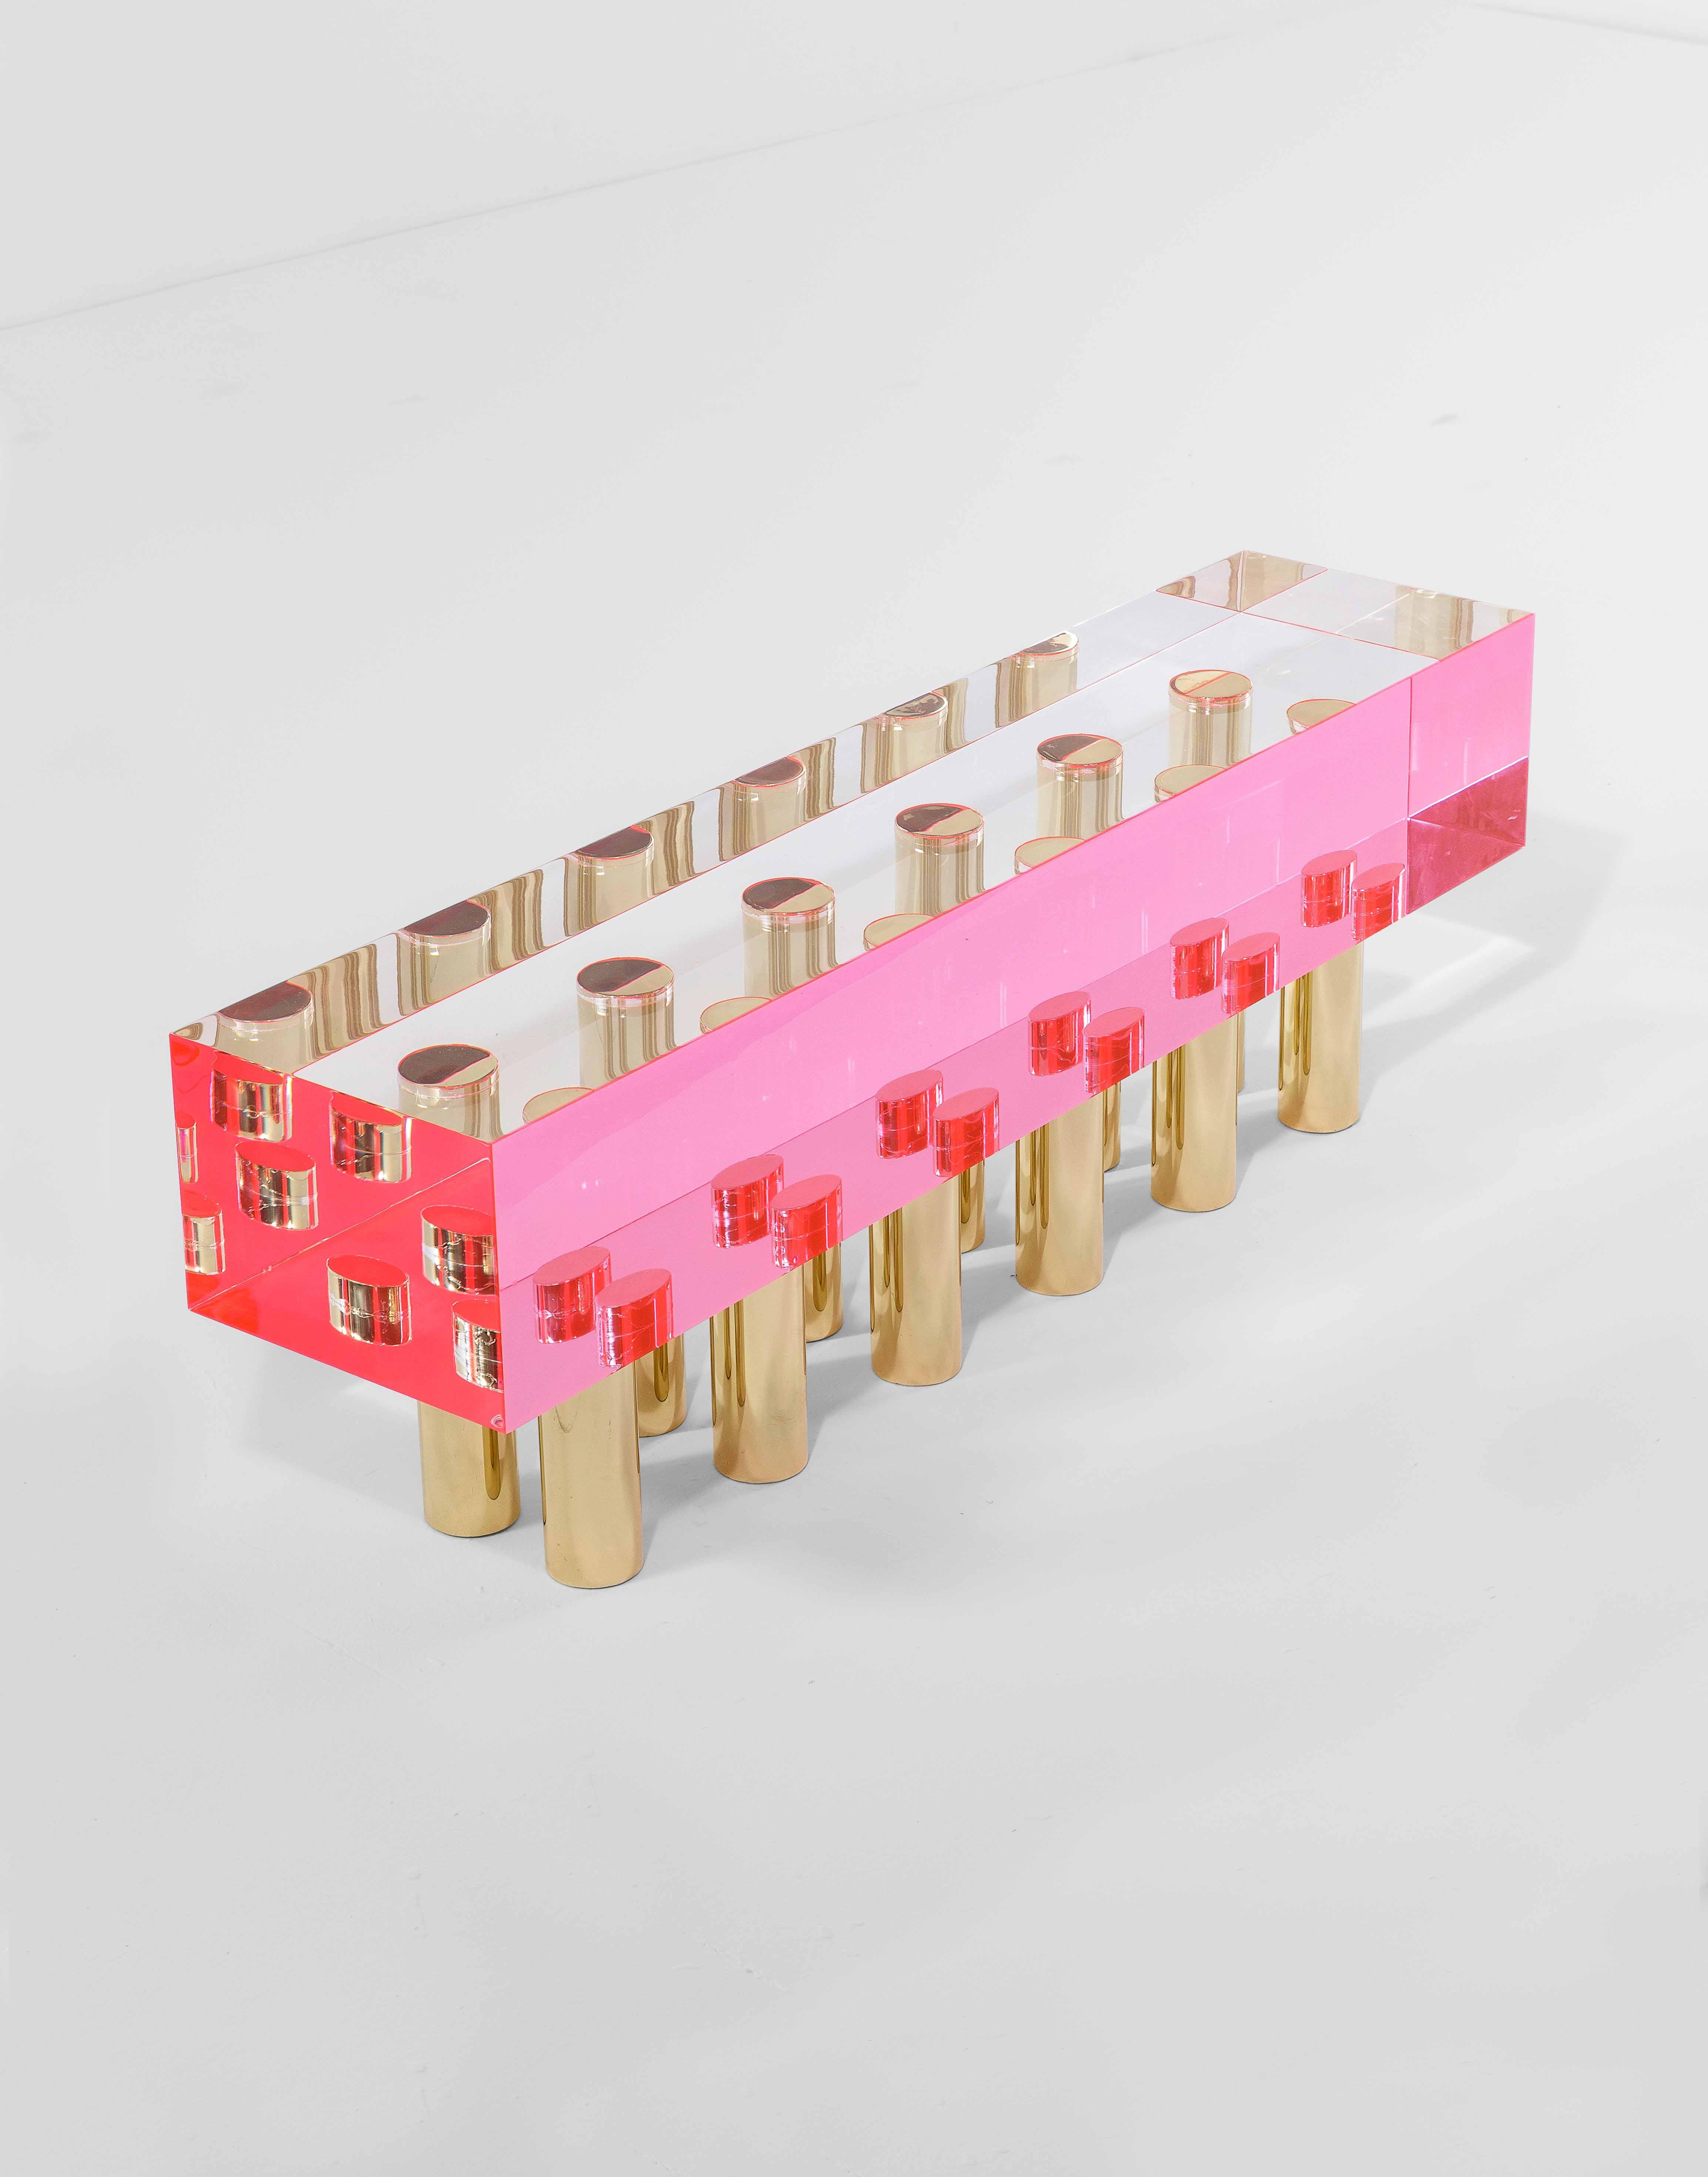 A beautiful bench or coffee table in transparent plexiglass with color pink and with ten brass legs designed by Studio Superego for Superego Editions, in 2018. 

Biography:
Superego editions was born in 2006, performing a constant activity of